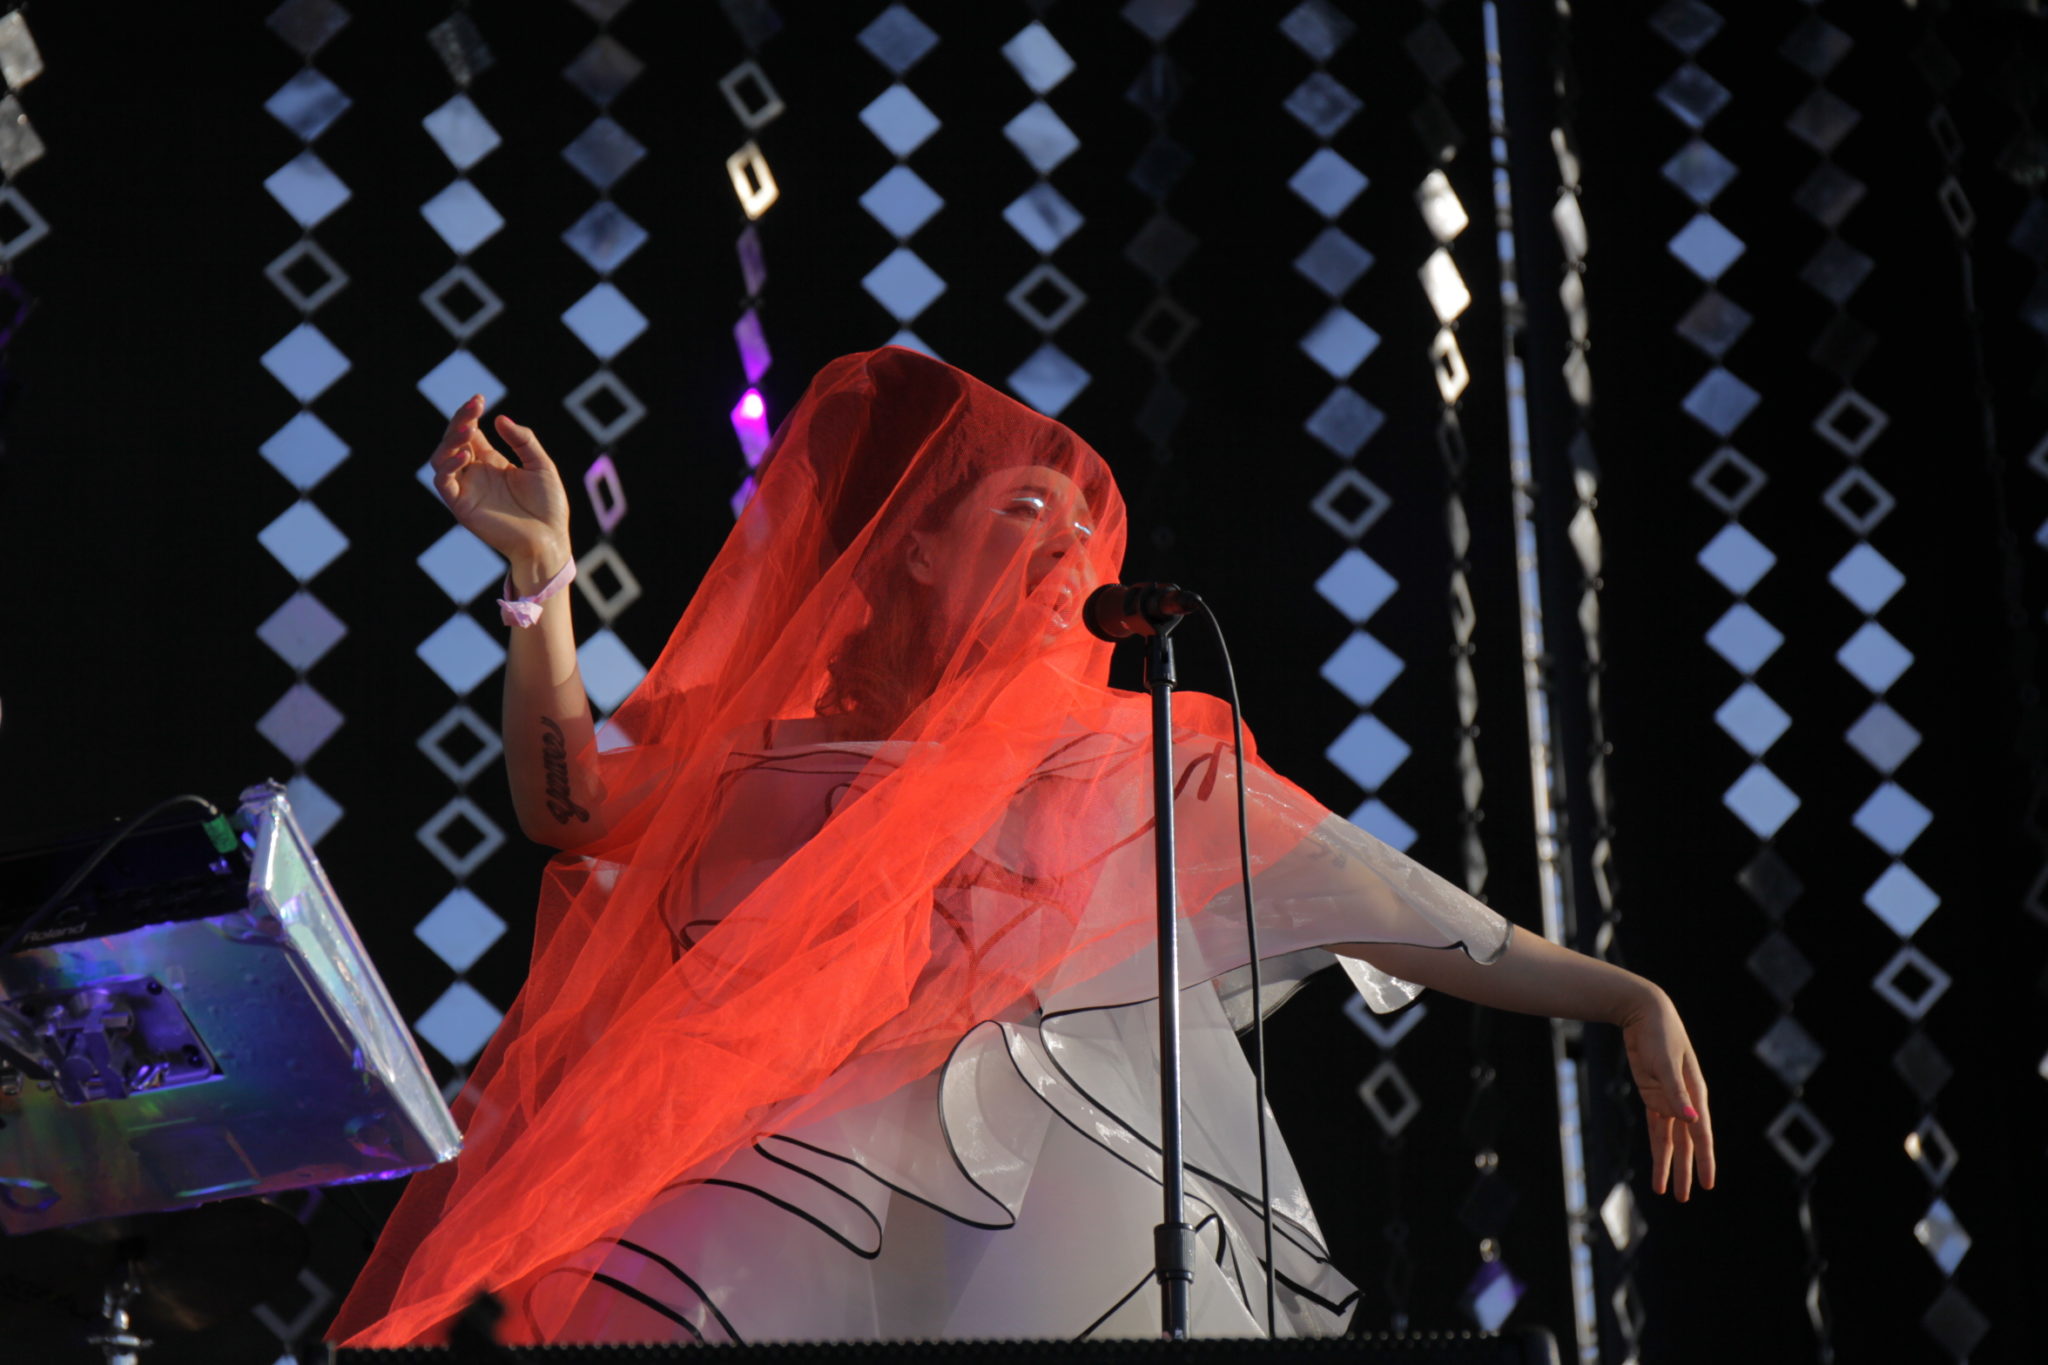 Little Dragon live onstage at the 2017 FYF Festival in Los Angeles, CA